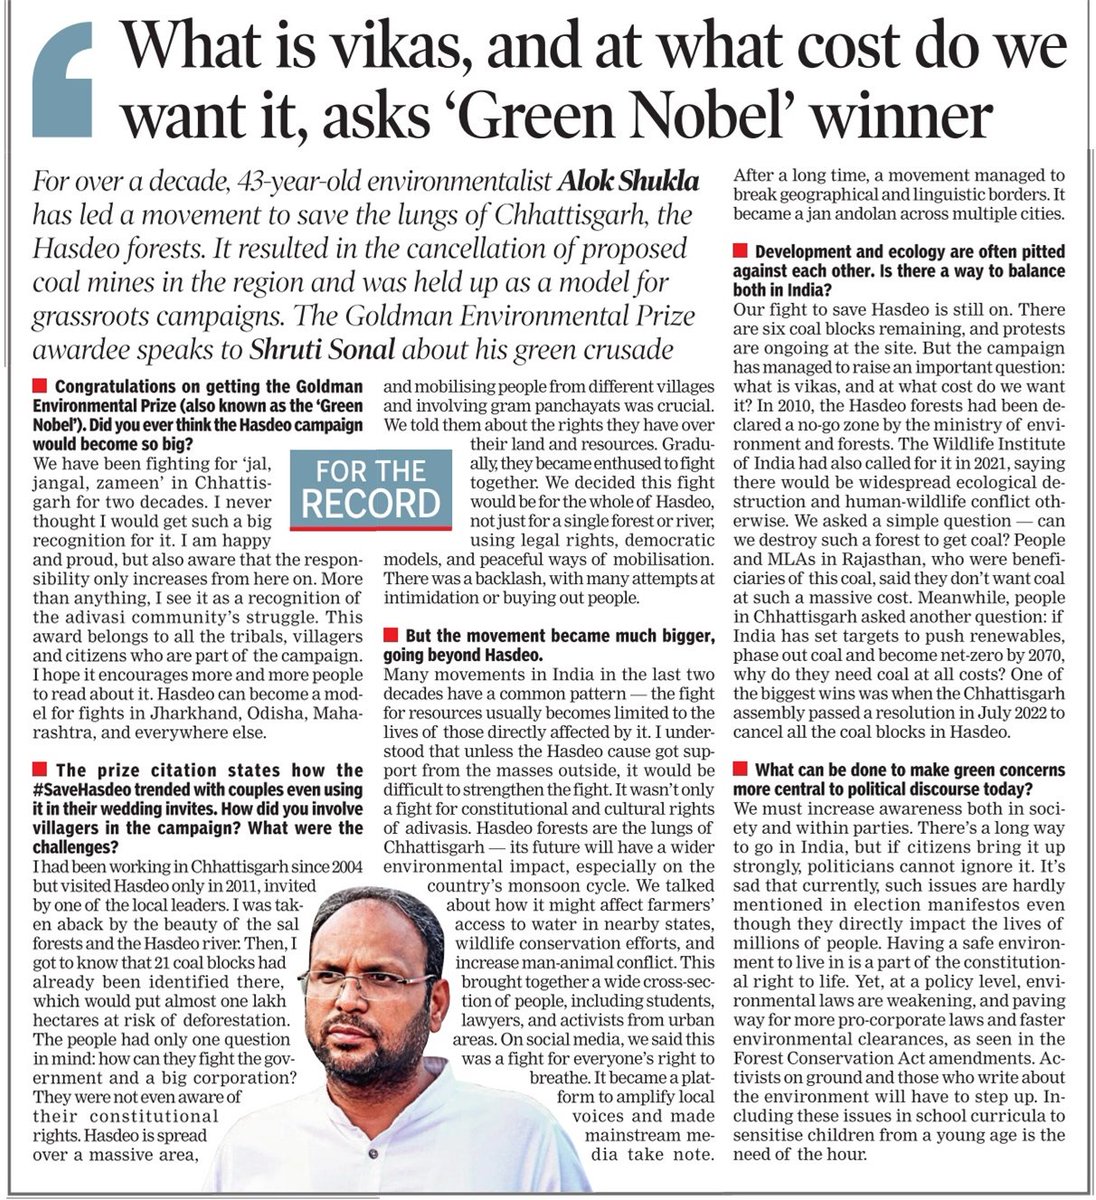 For years, 43-year-old environmentalist @alokshuklacg has led a movement to save the Hasdeo forests. It resulted in cancellation of proposed coal mines & was held up as a model for grassroots campaigns. Spoke to the Goldman Environmental Prize awardee about his ongoing fight 👇